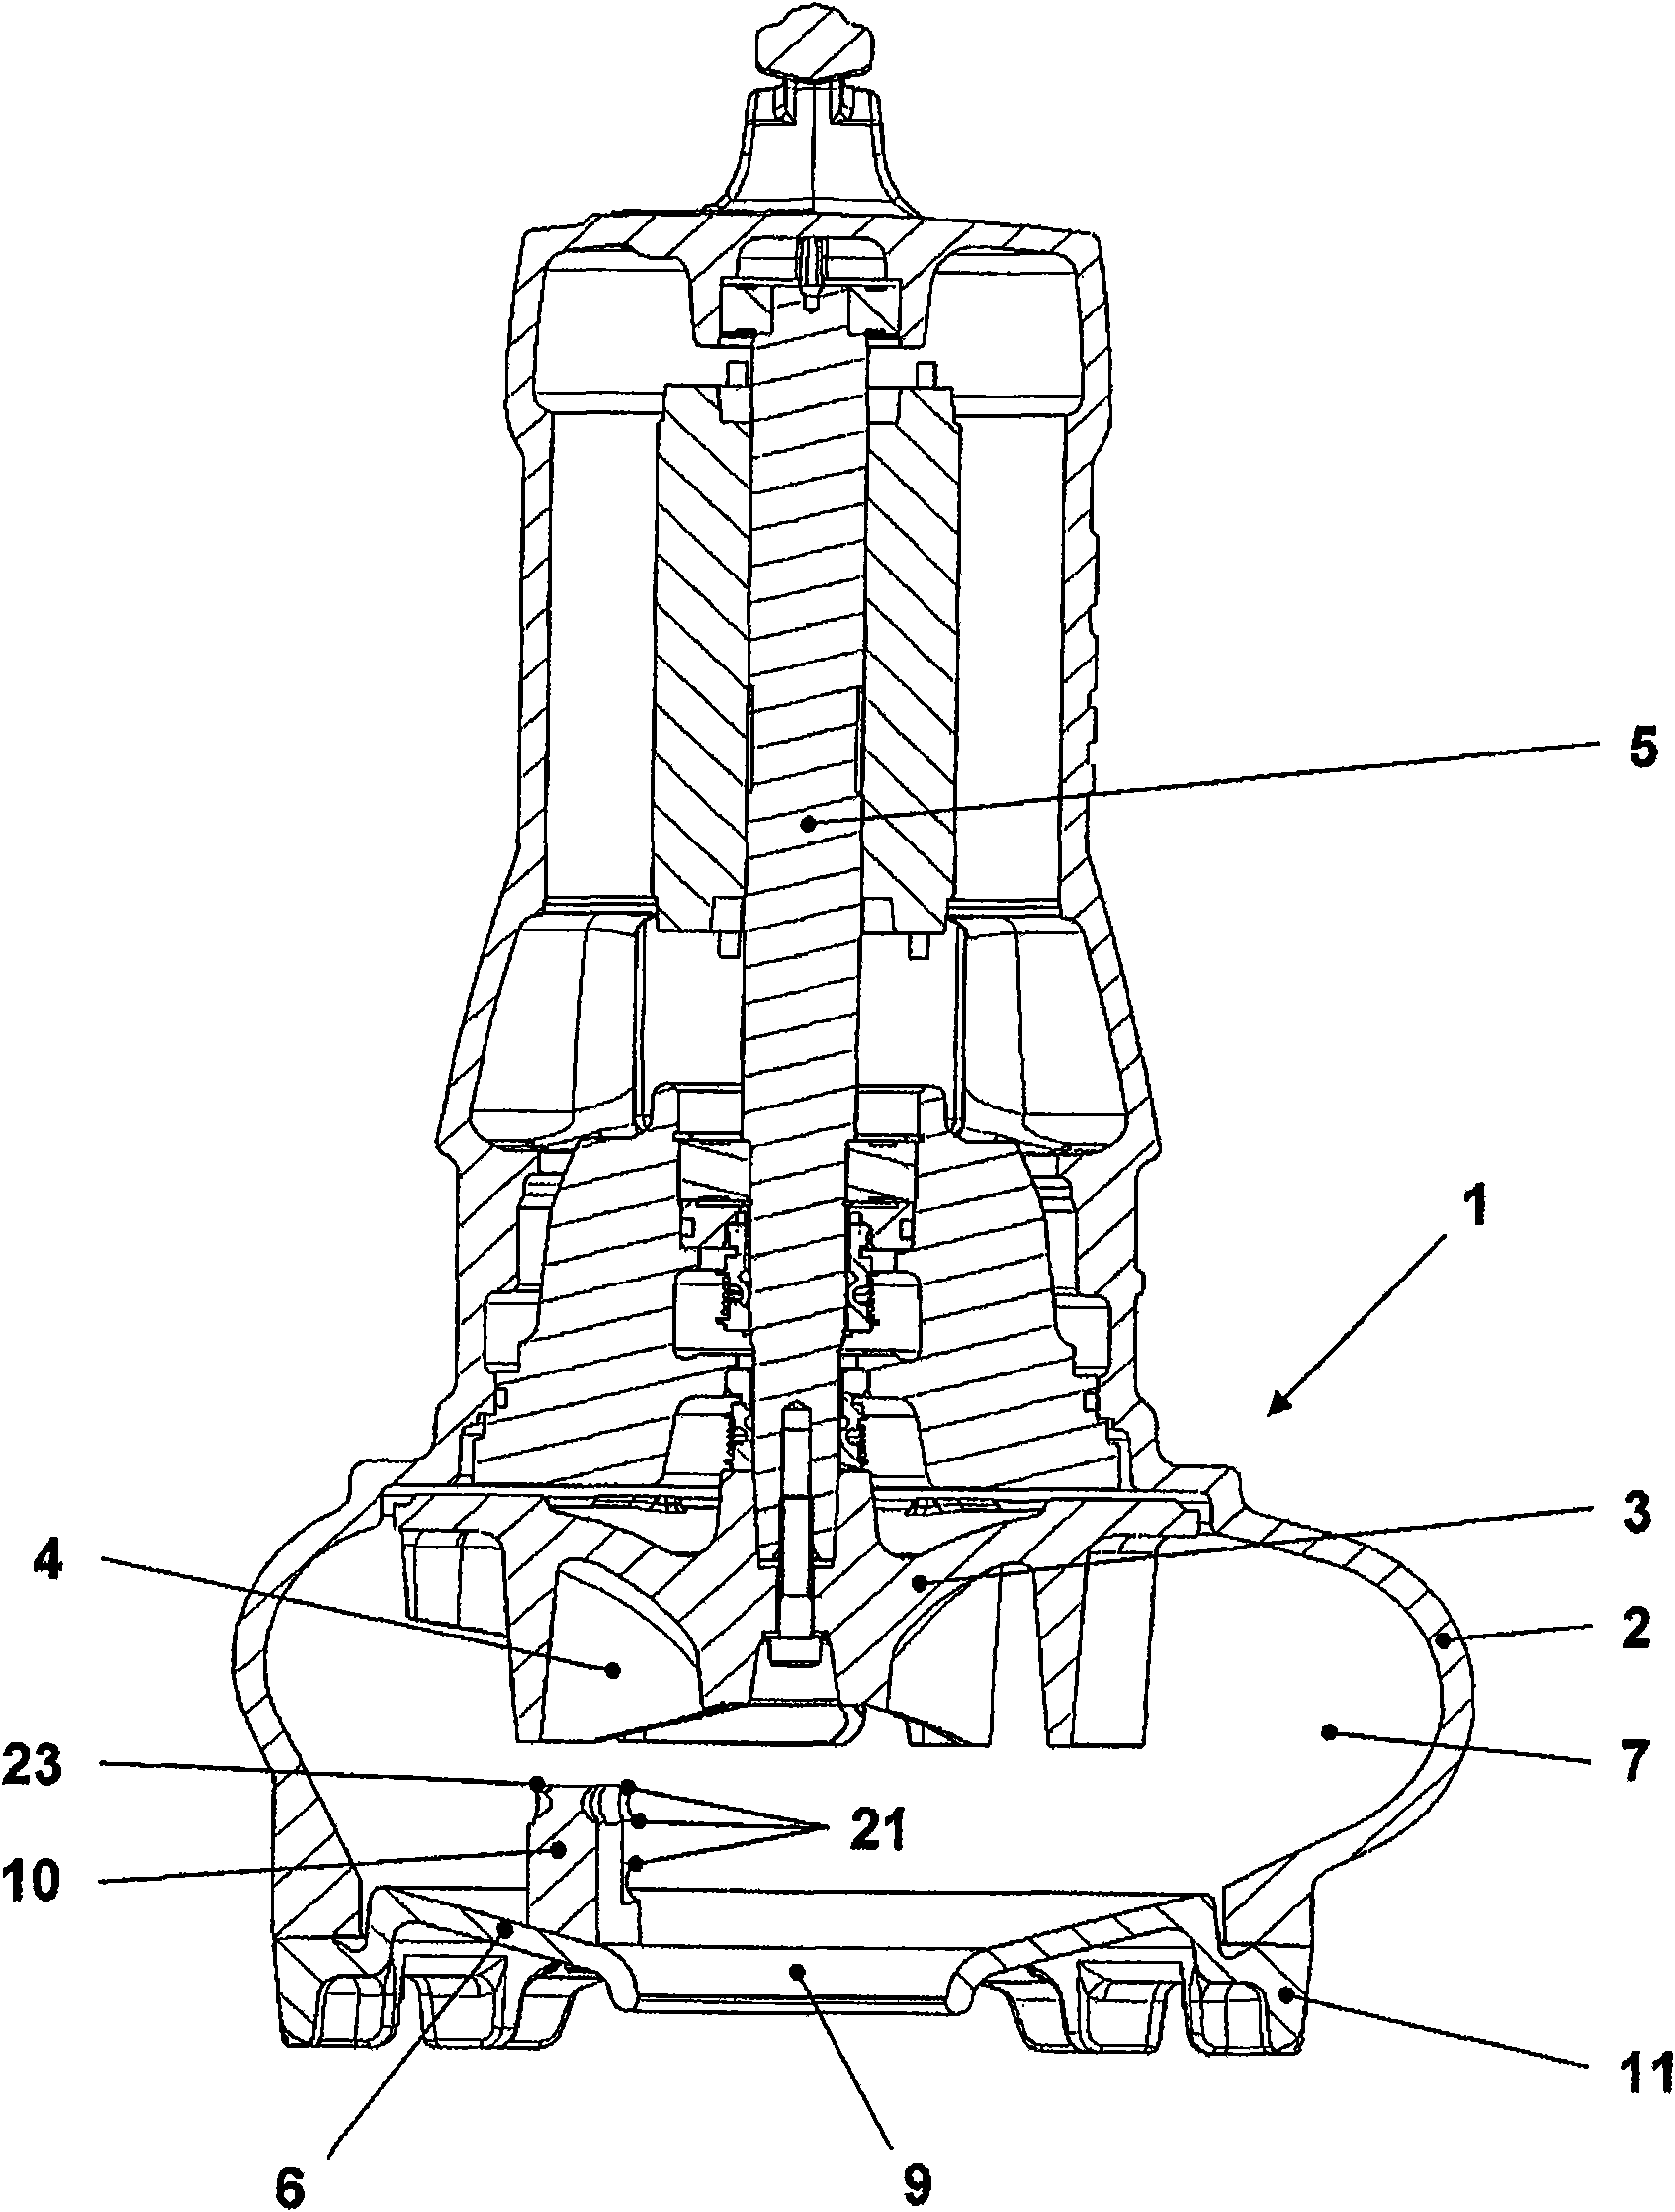 Centrifugal pump with free flow wheel